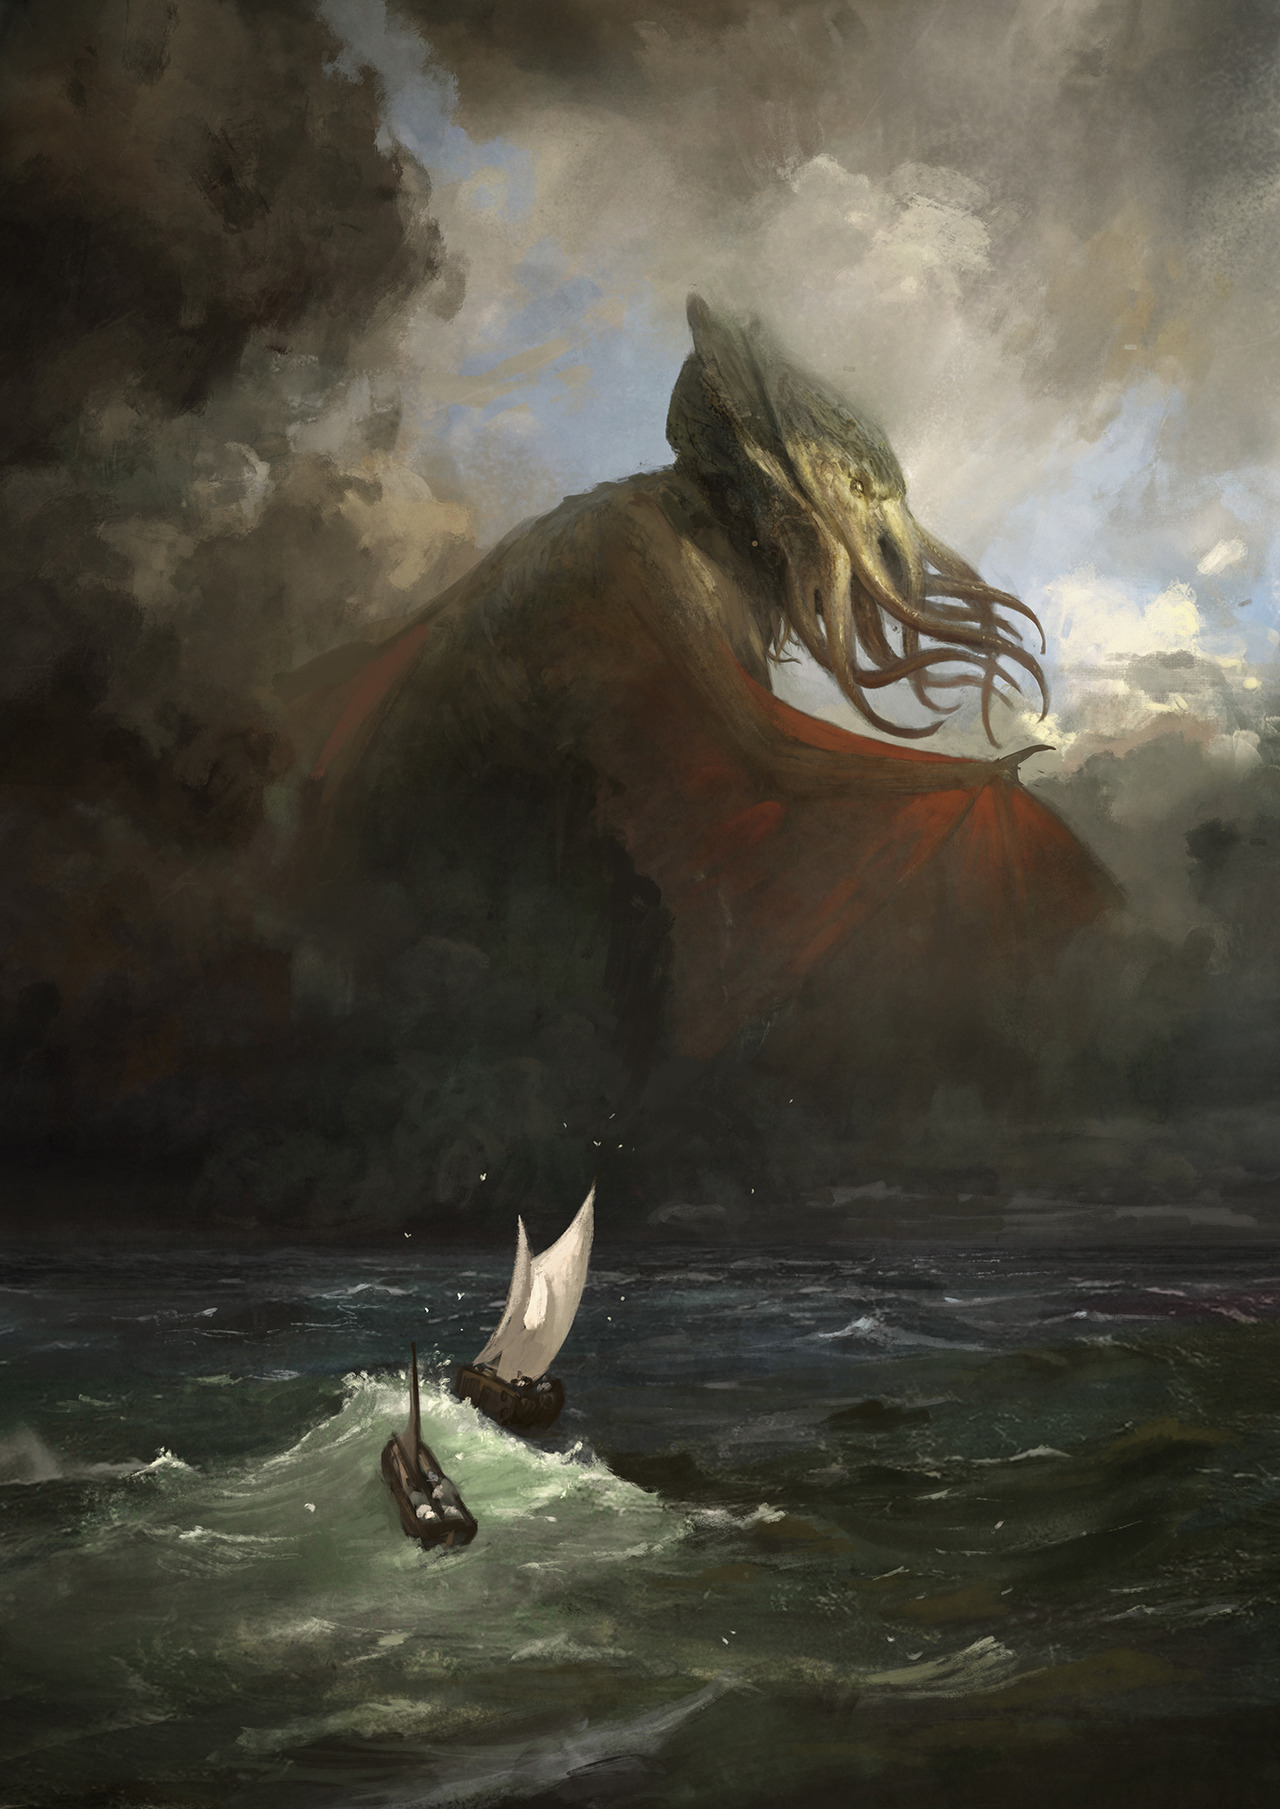 call of the sea lovecraft download